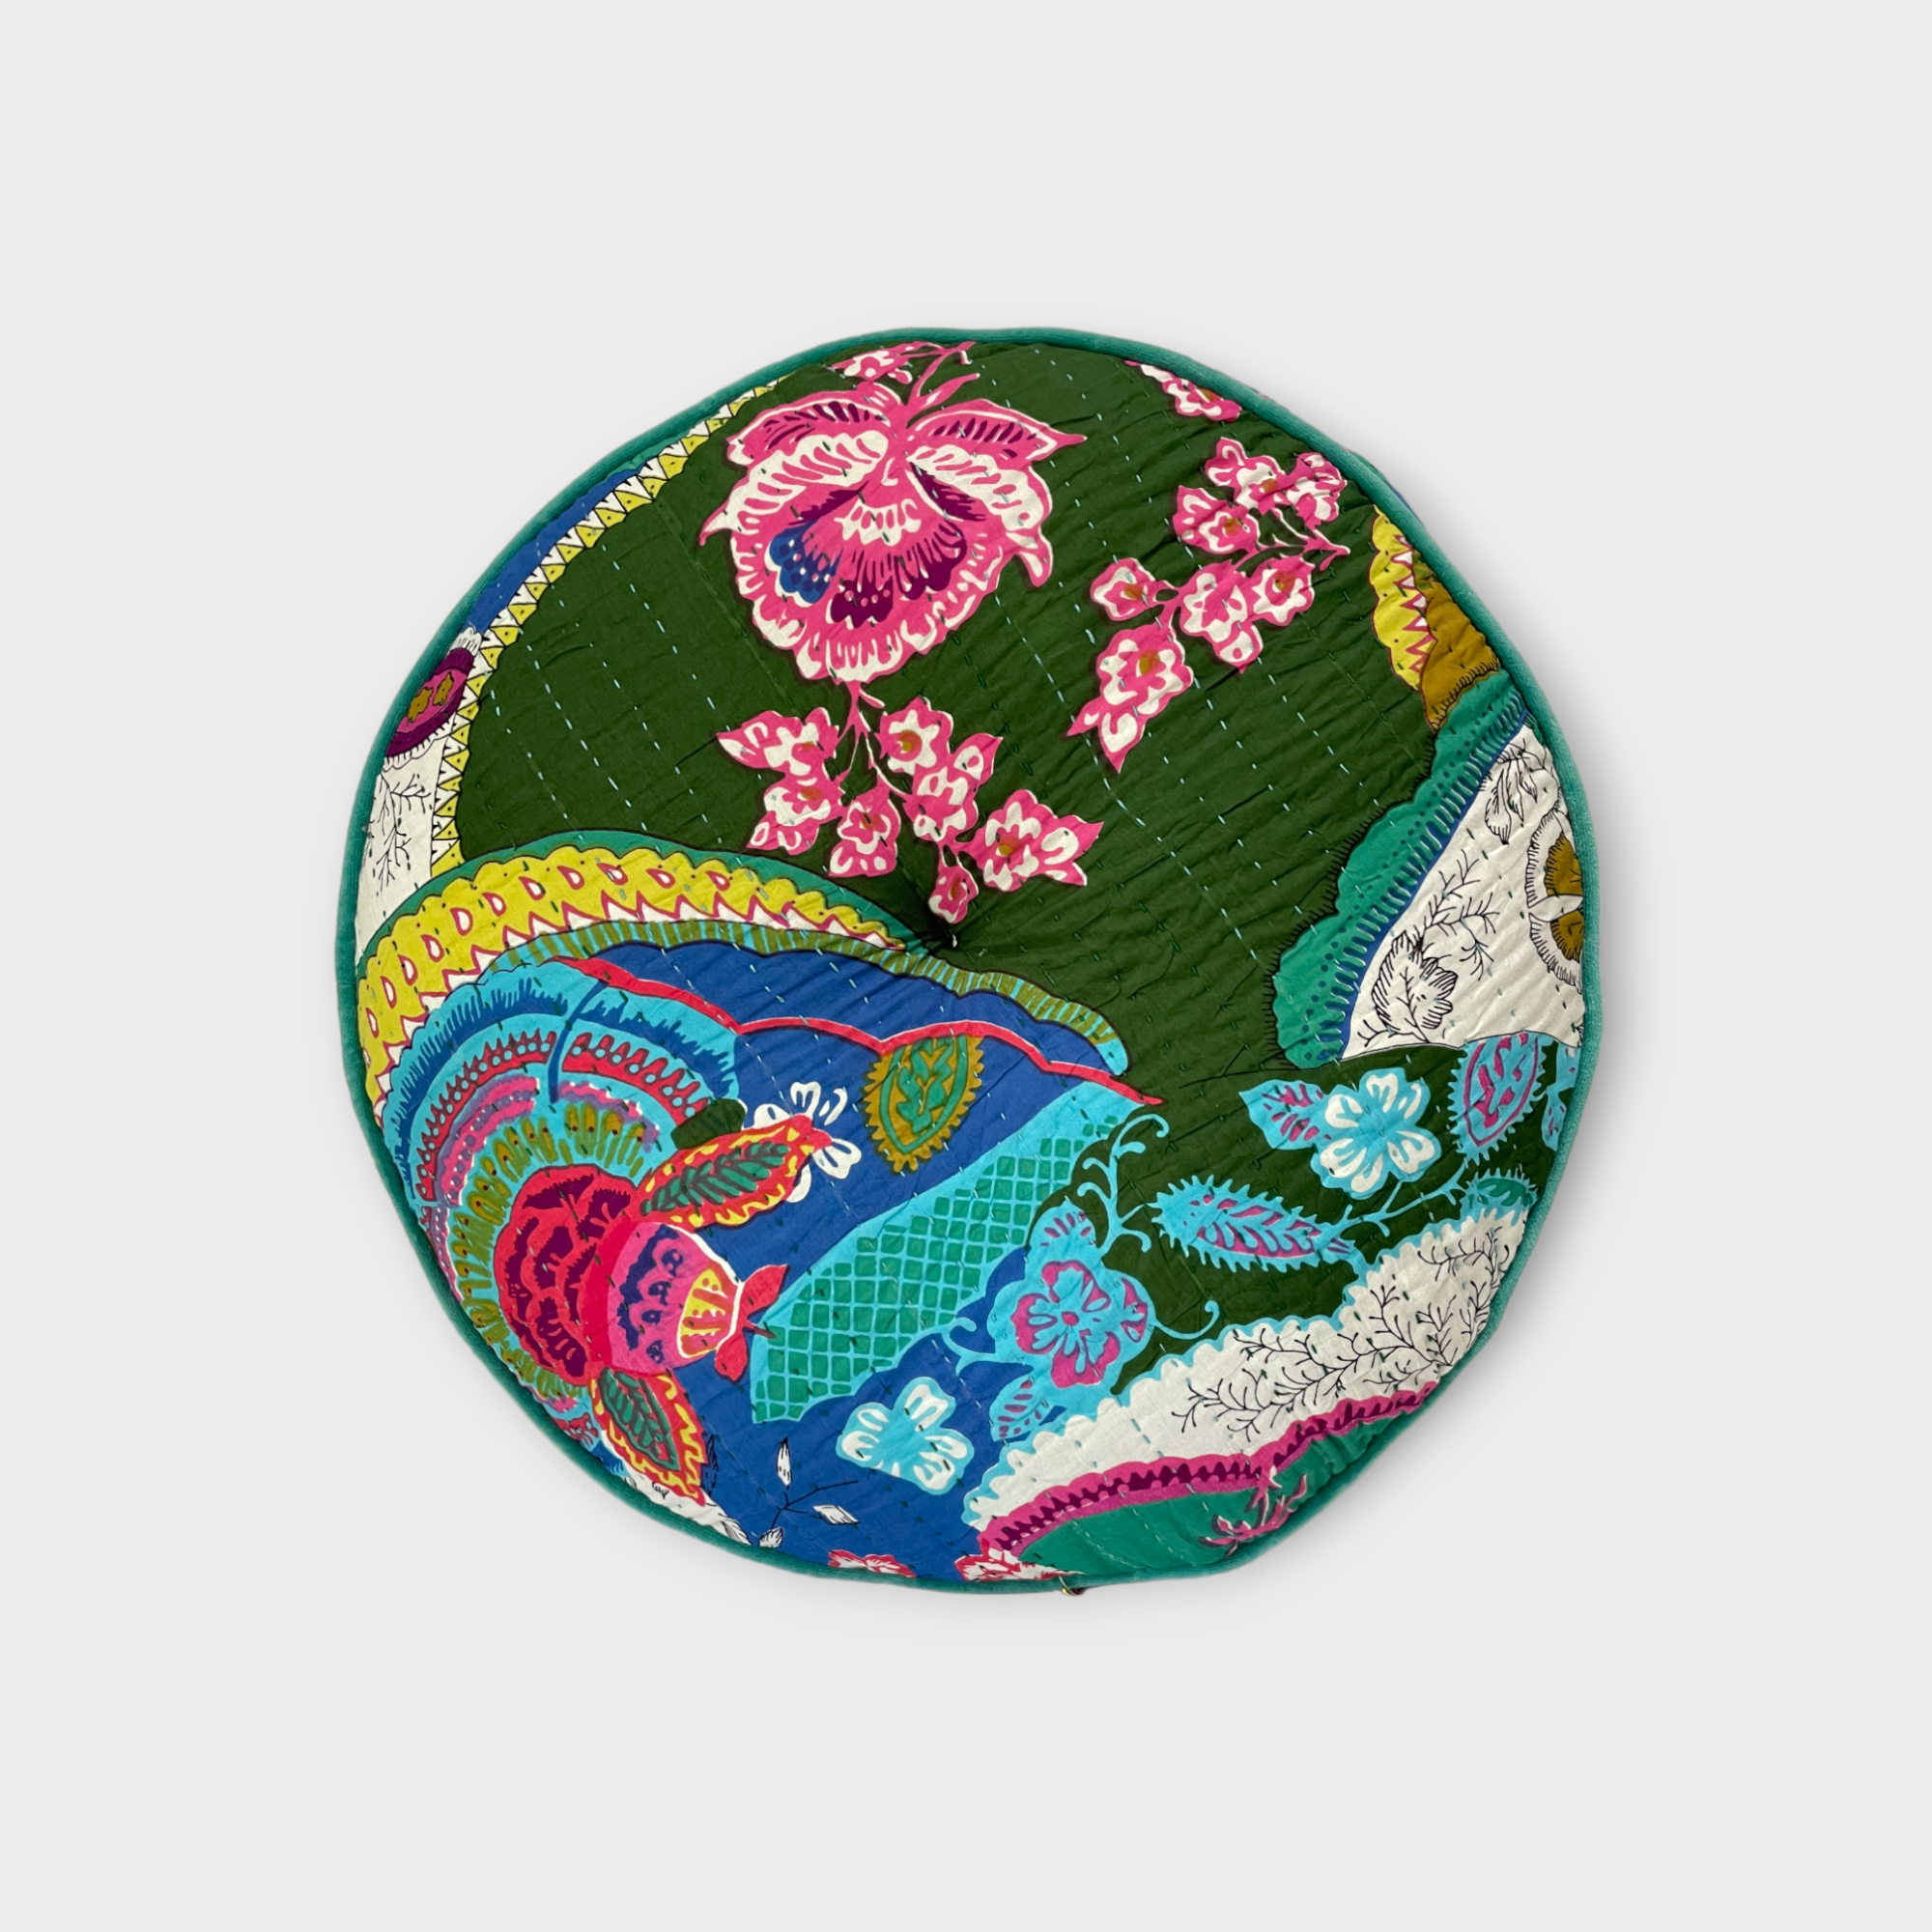 Big Round floor pillow, handmade from India (pouf)